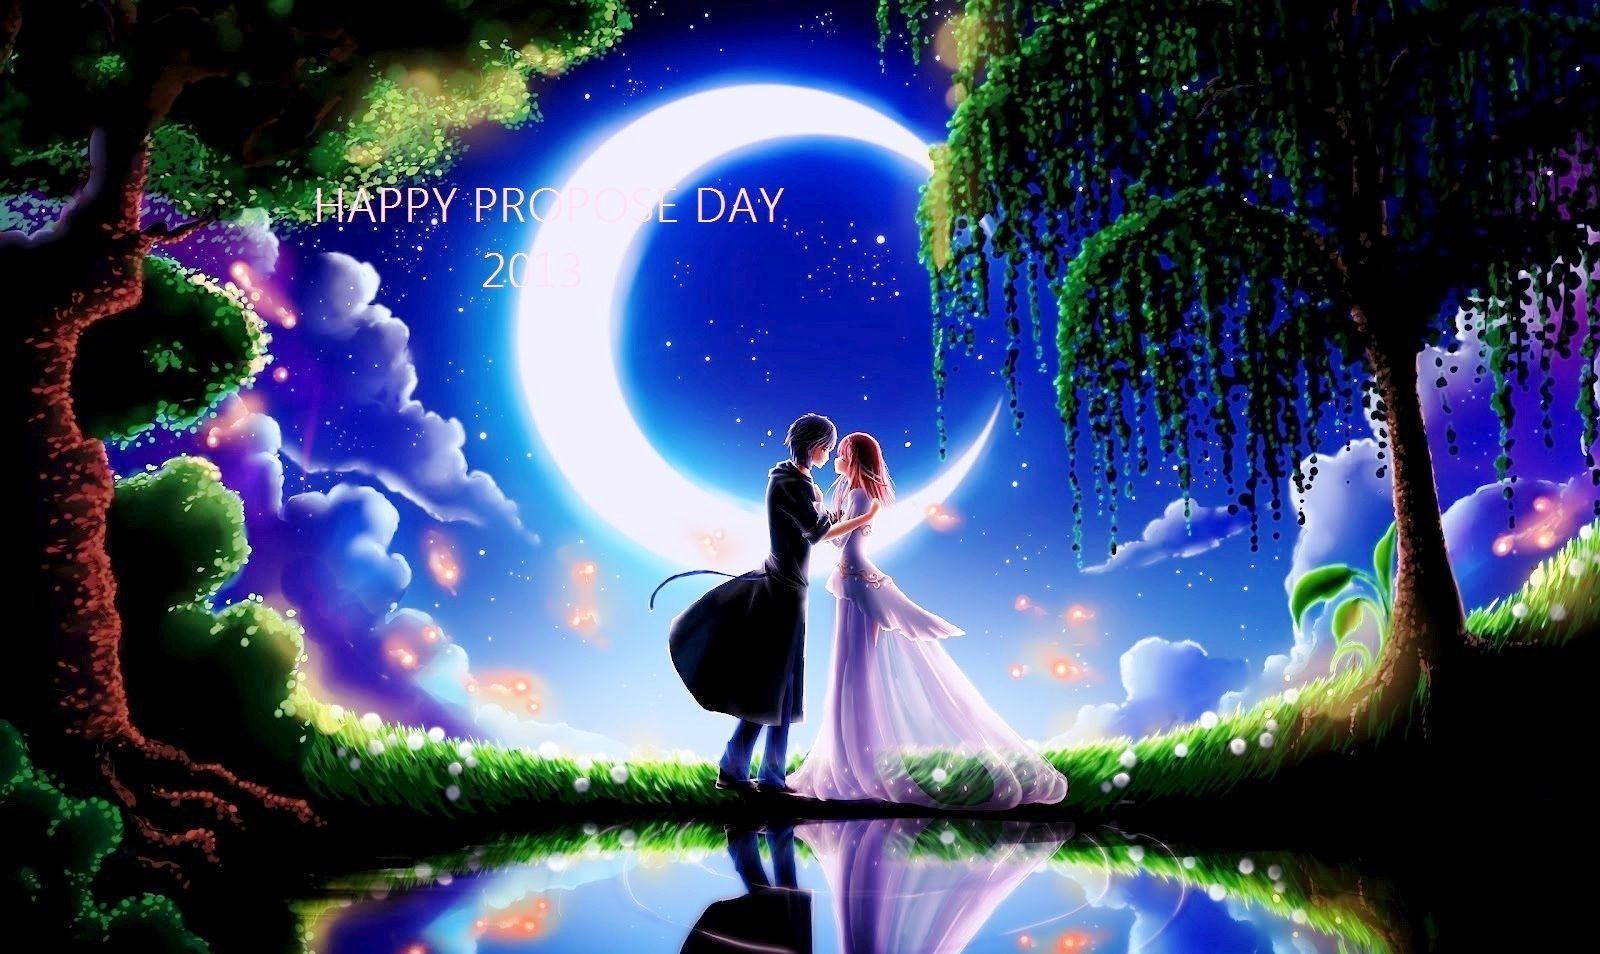 Propose Day Wallpapers - Wallpaper Cave